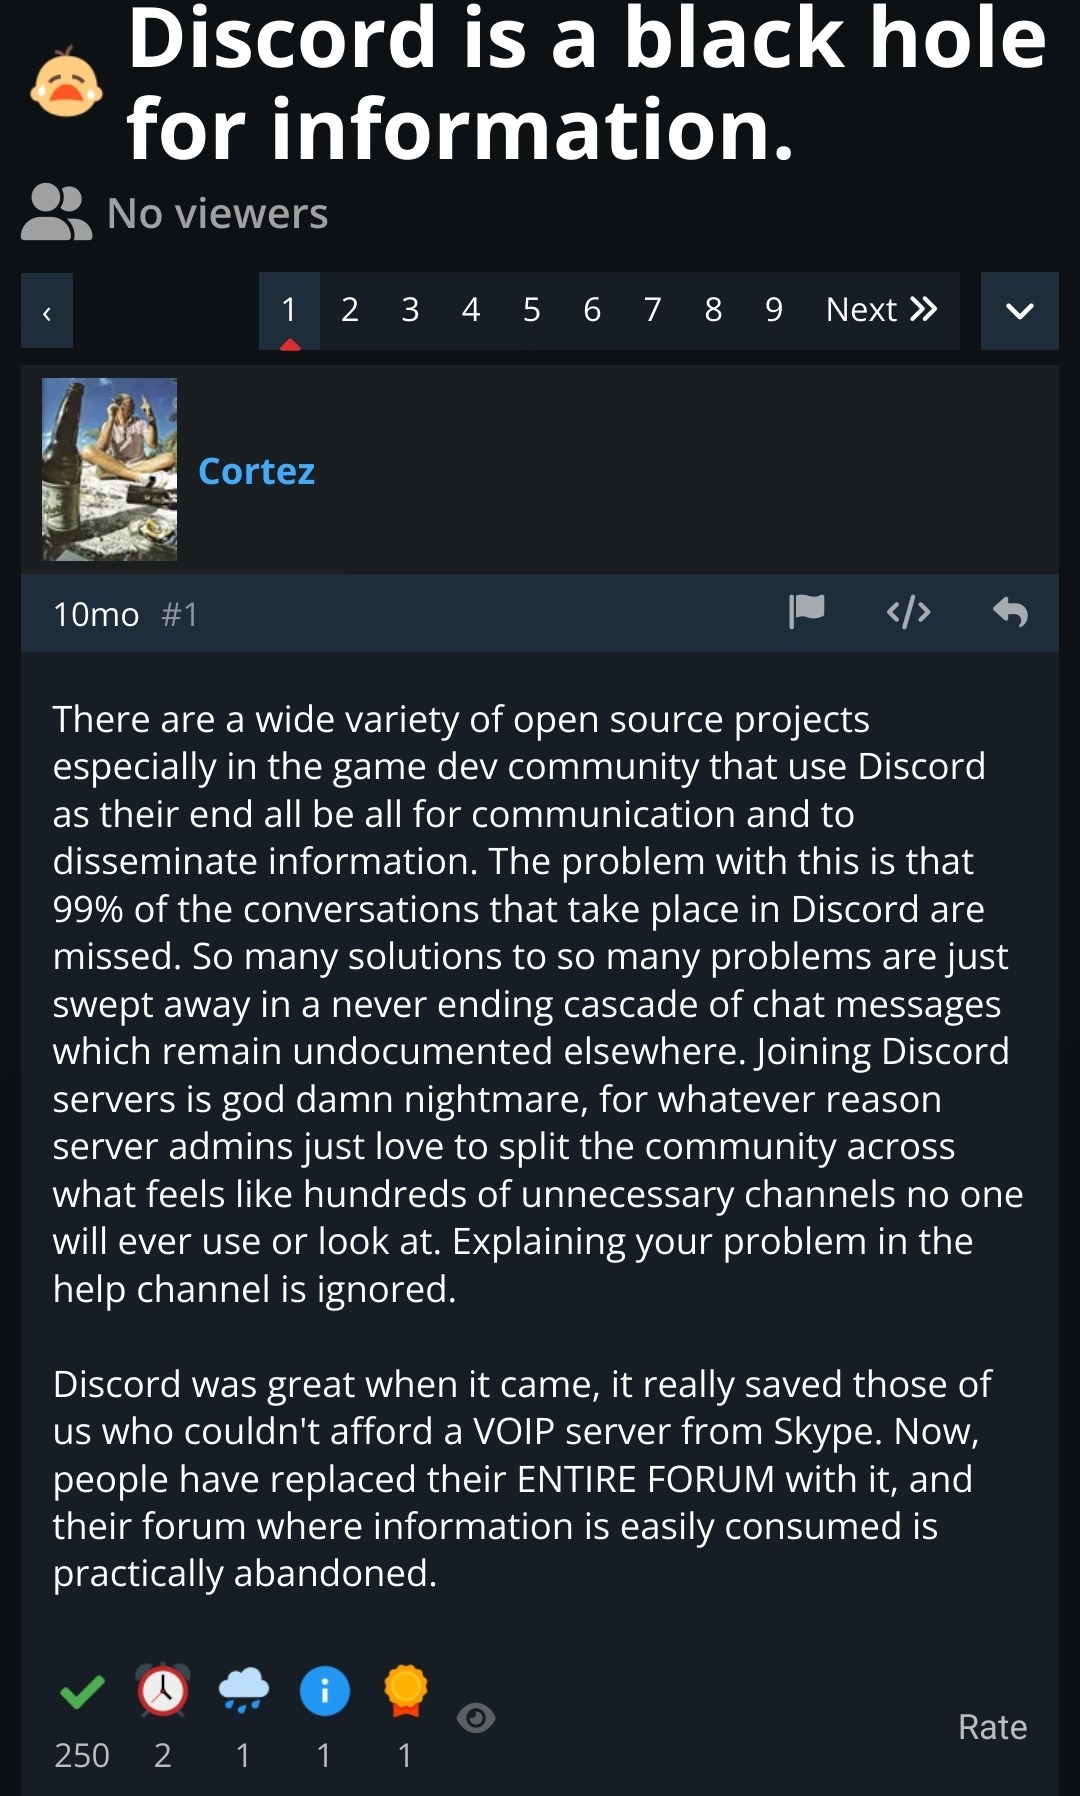 Discord Is A Black Hole For Information

There are a wide variety of open source projects especially in the game dev community that use Discord as their end all be all for communication and to disseminate information. The problem with this is that 99% of the conversations that take place in Discord are missed. So many solutions to so many problems are just swept away in a never ending cascade of chat messages which remain undocumented elsewhere. Joining Discord servers is god damn nightmare, for whatever reason server admins just love to split the community across what feels like hundreds of unnecessary channels no one will ever use or look at. Explaining your problem in the help channel is ignored. 

Discord was great when it came, it really saved those of us who couldn't afford a VOIP server from Skype. Now, people have replaced their ENTIRE FORUM with it, and their forum where information is easily consumed is practically abandoned. 